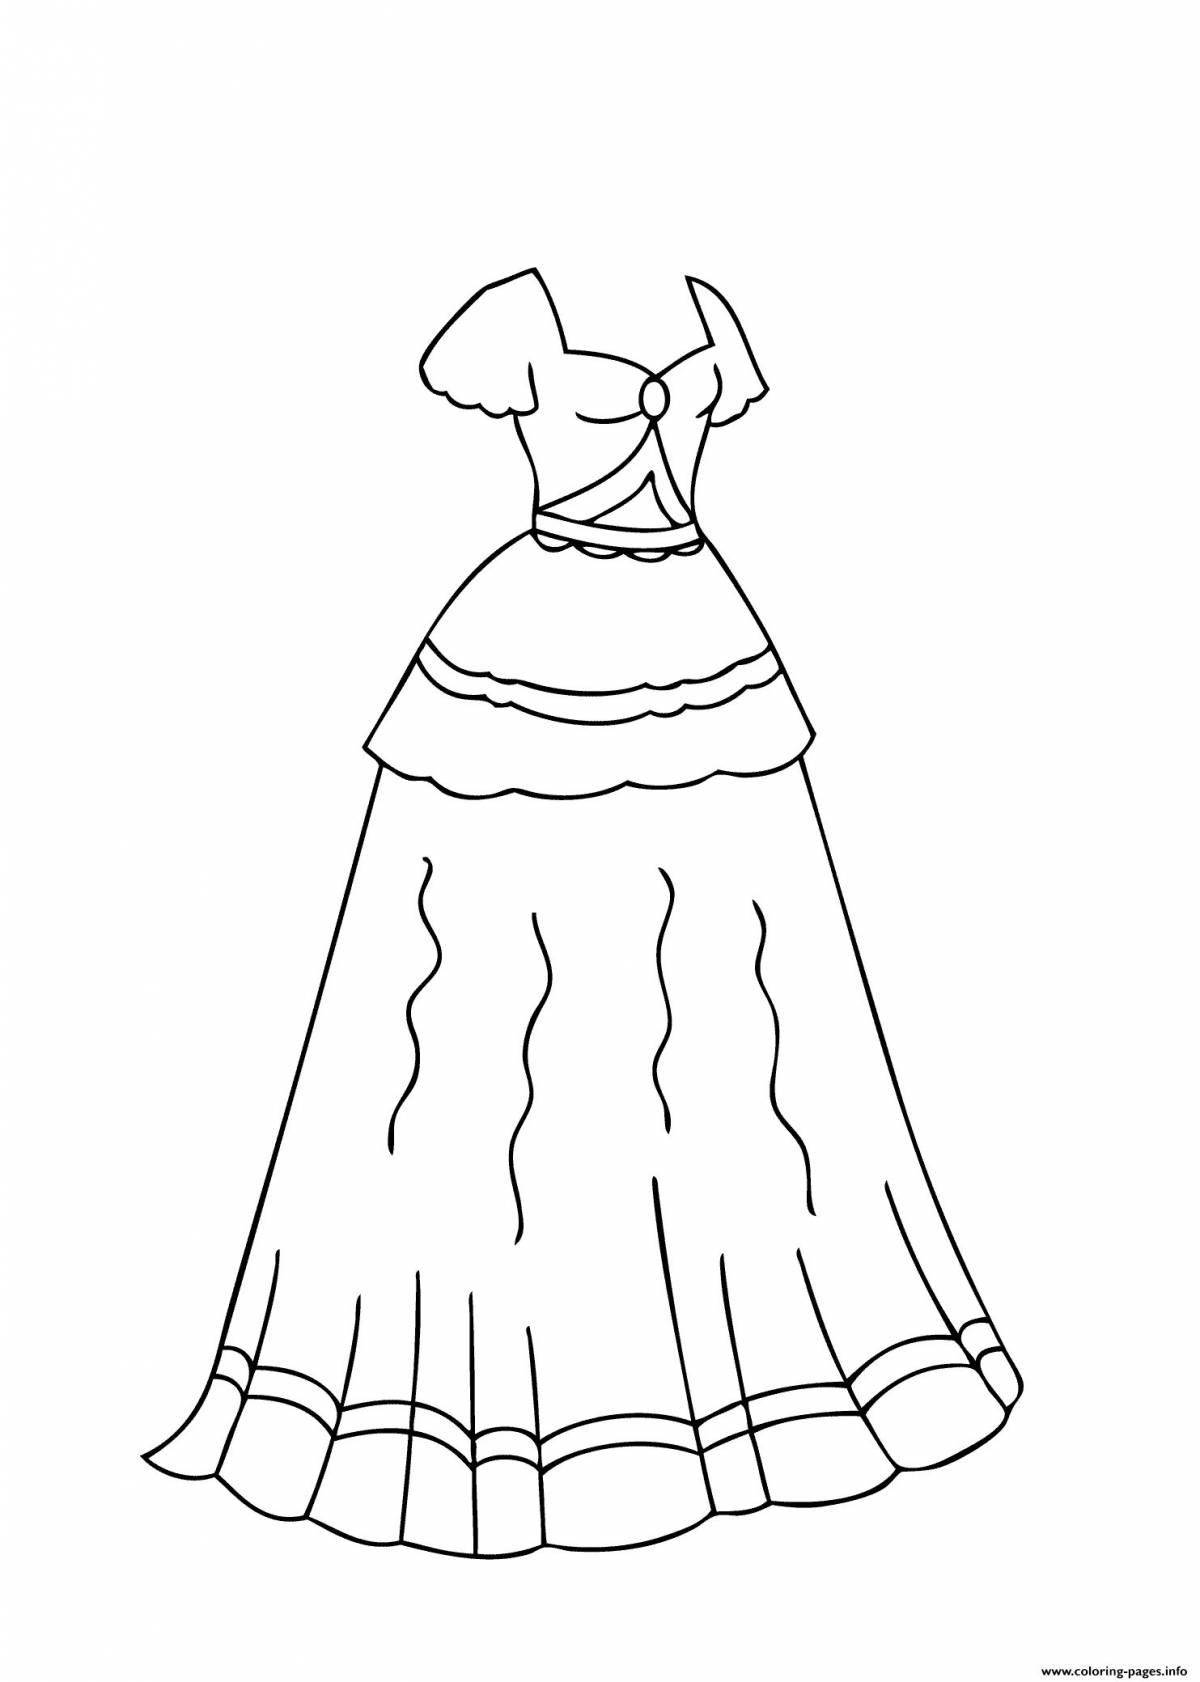 Bright ball gown coloring page